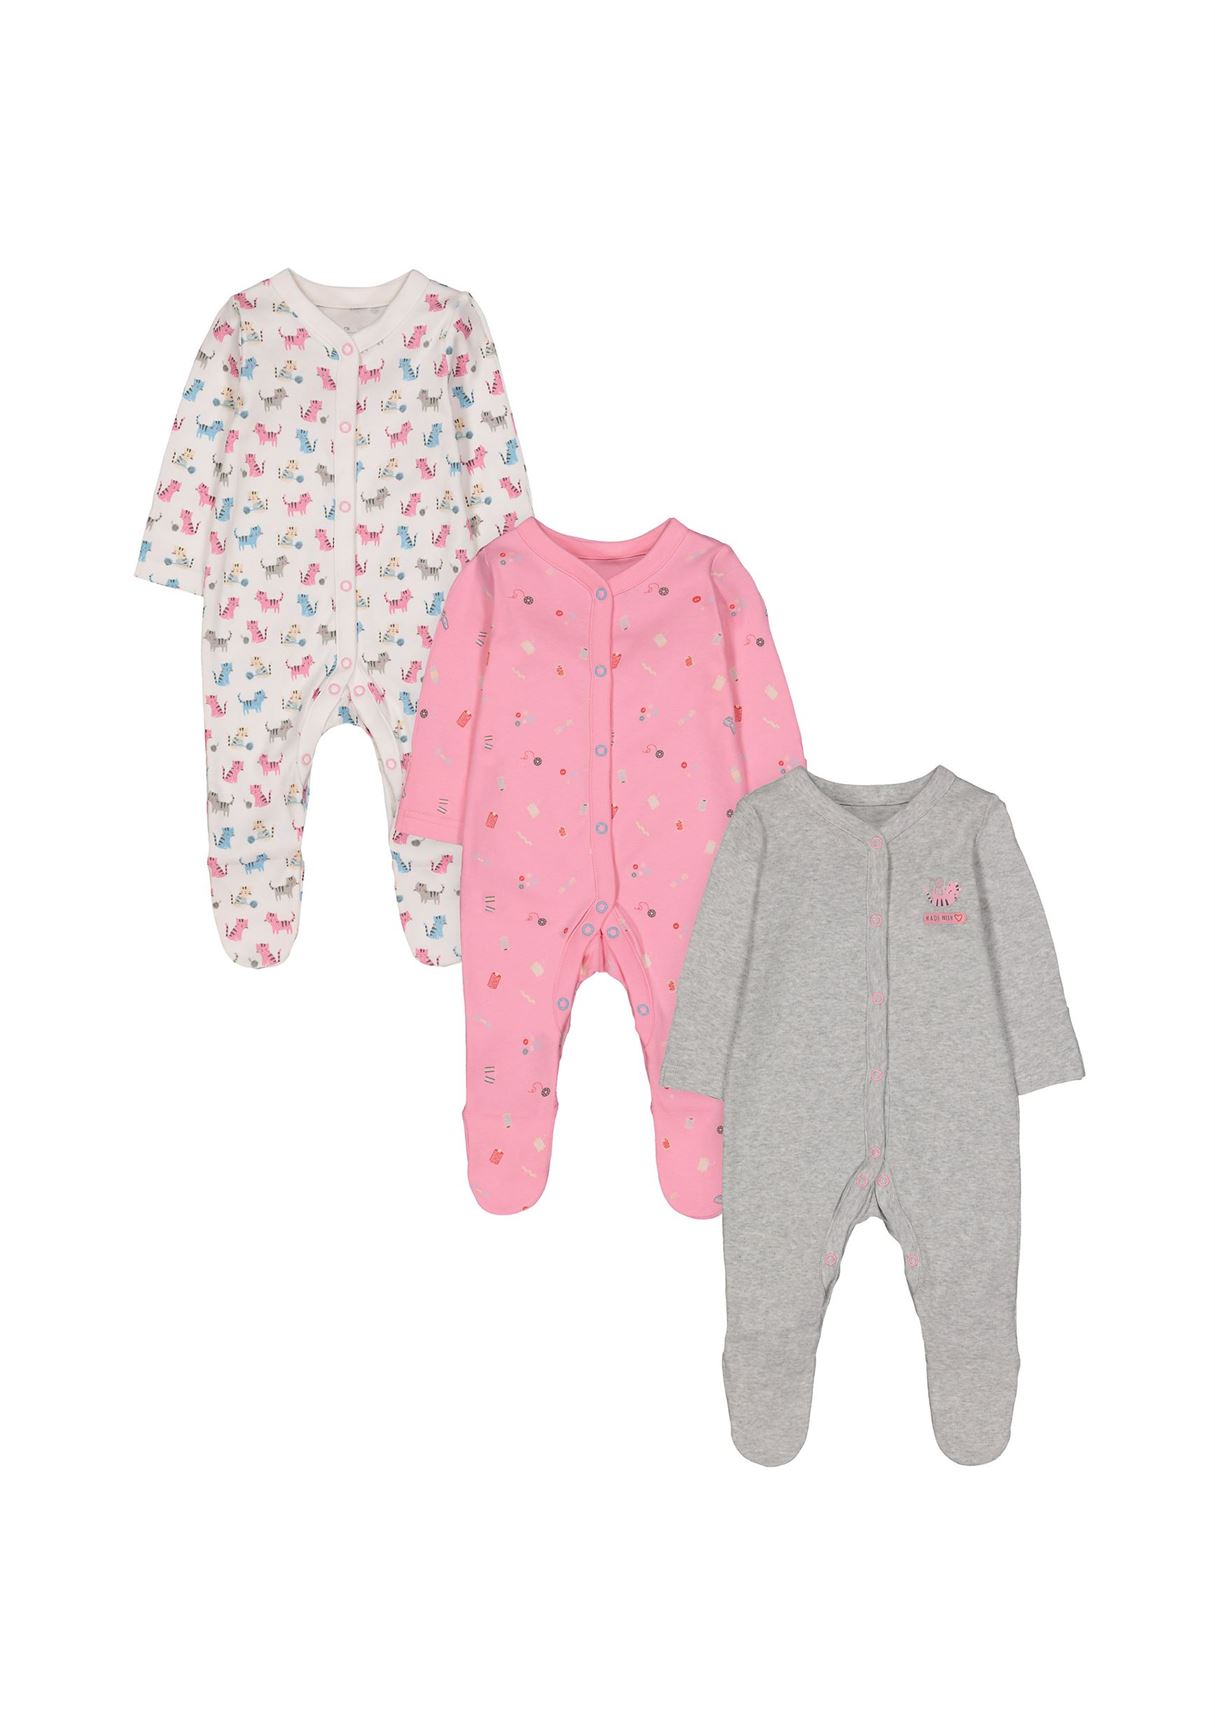 Mothercare Girls Pink Printed Pack of 3 Sleepsuit